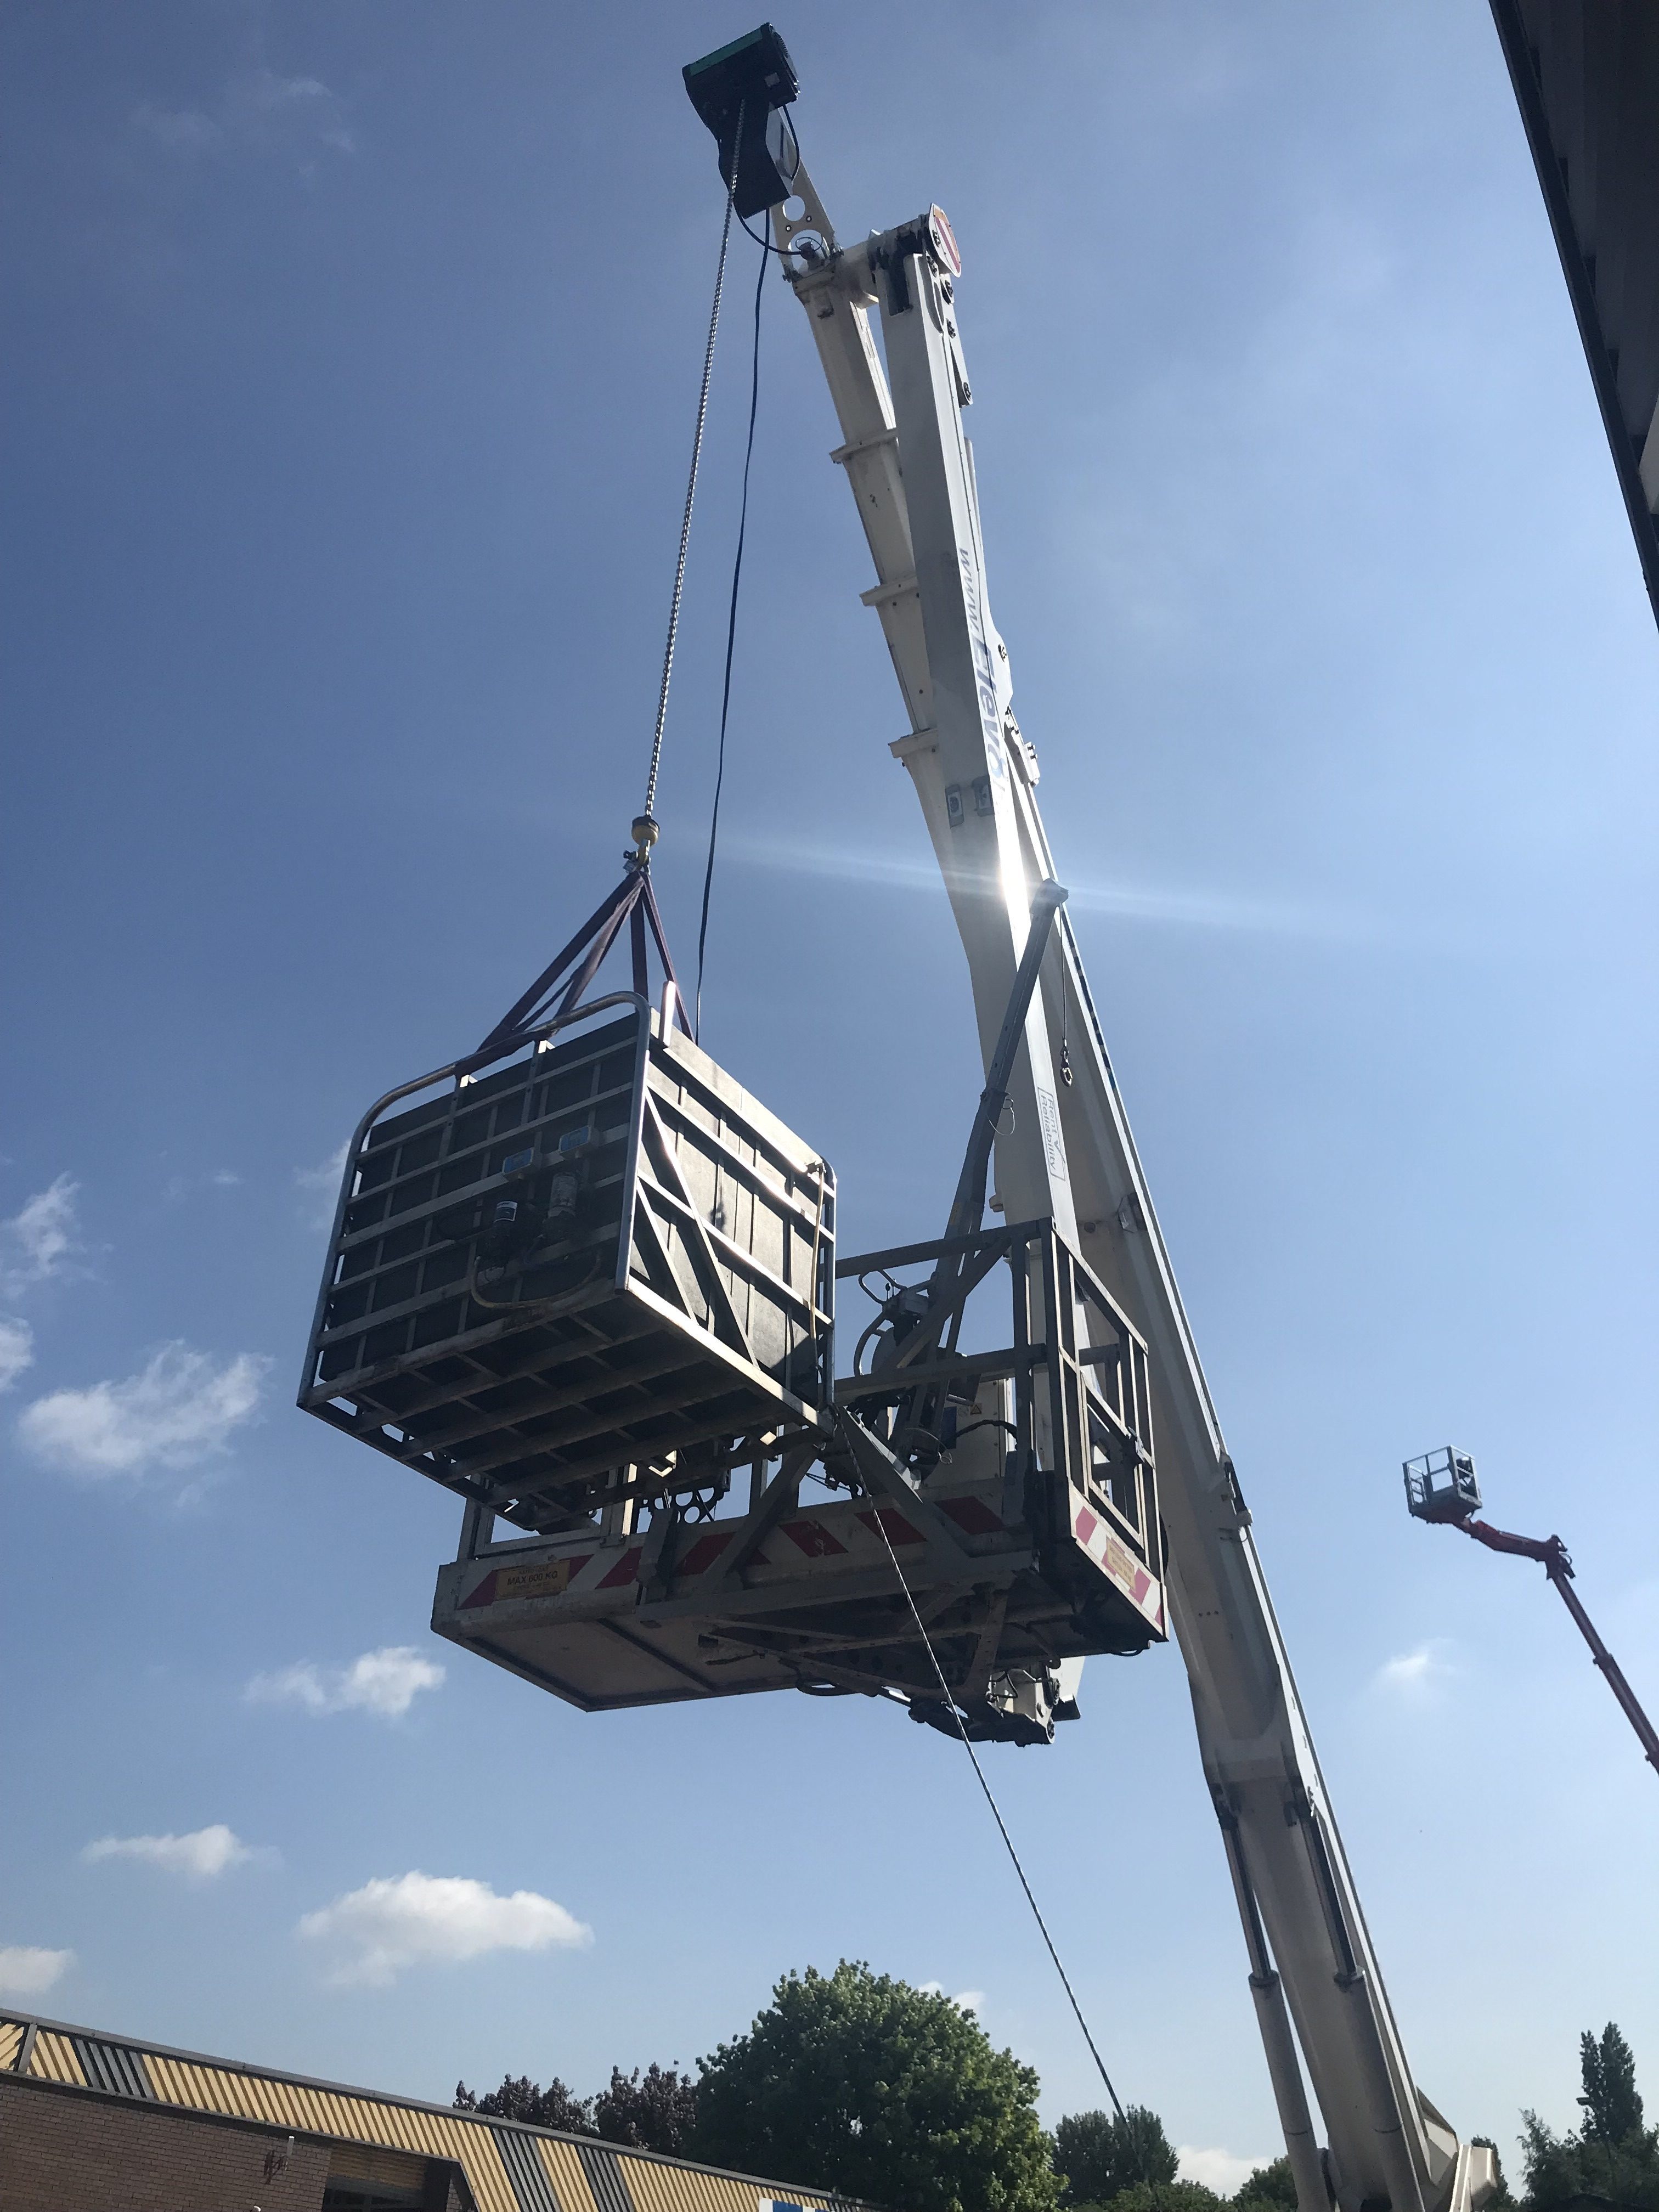 Lifting materials safely with an access platform